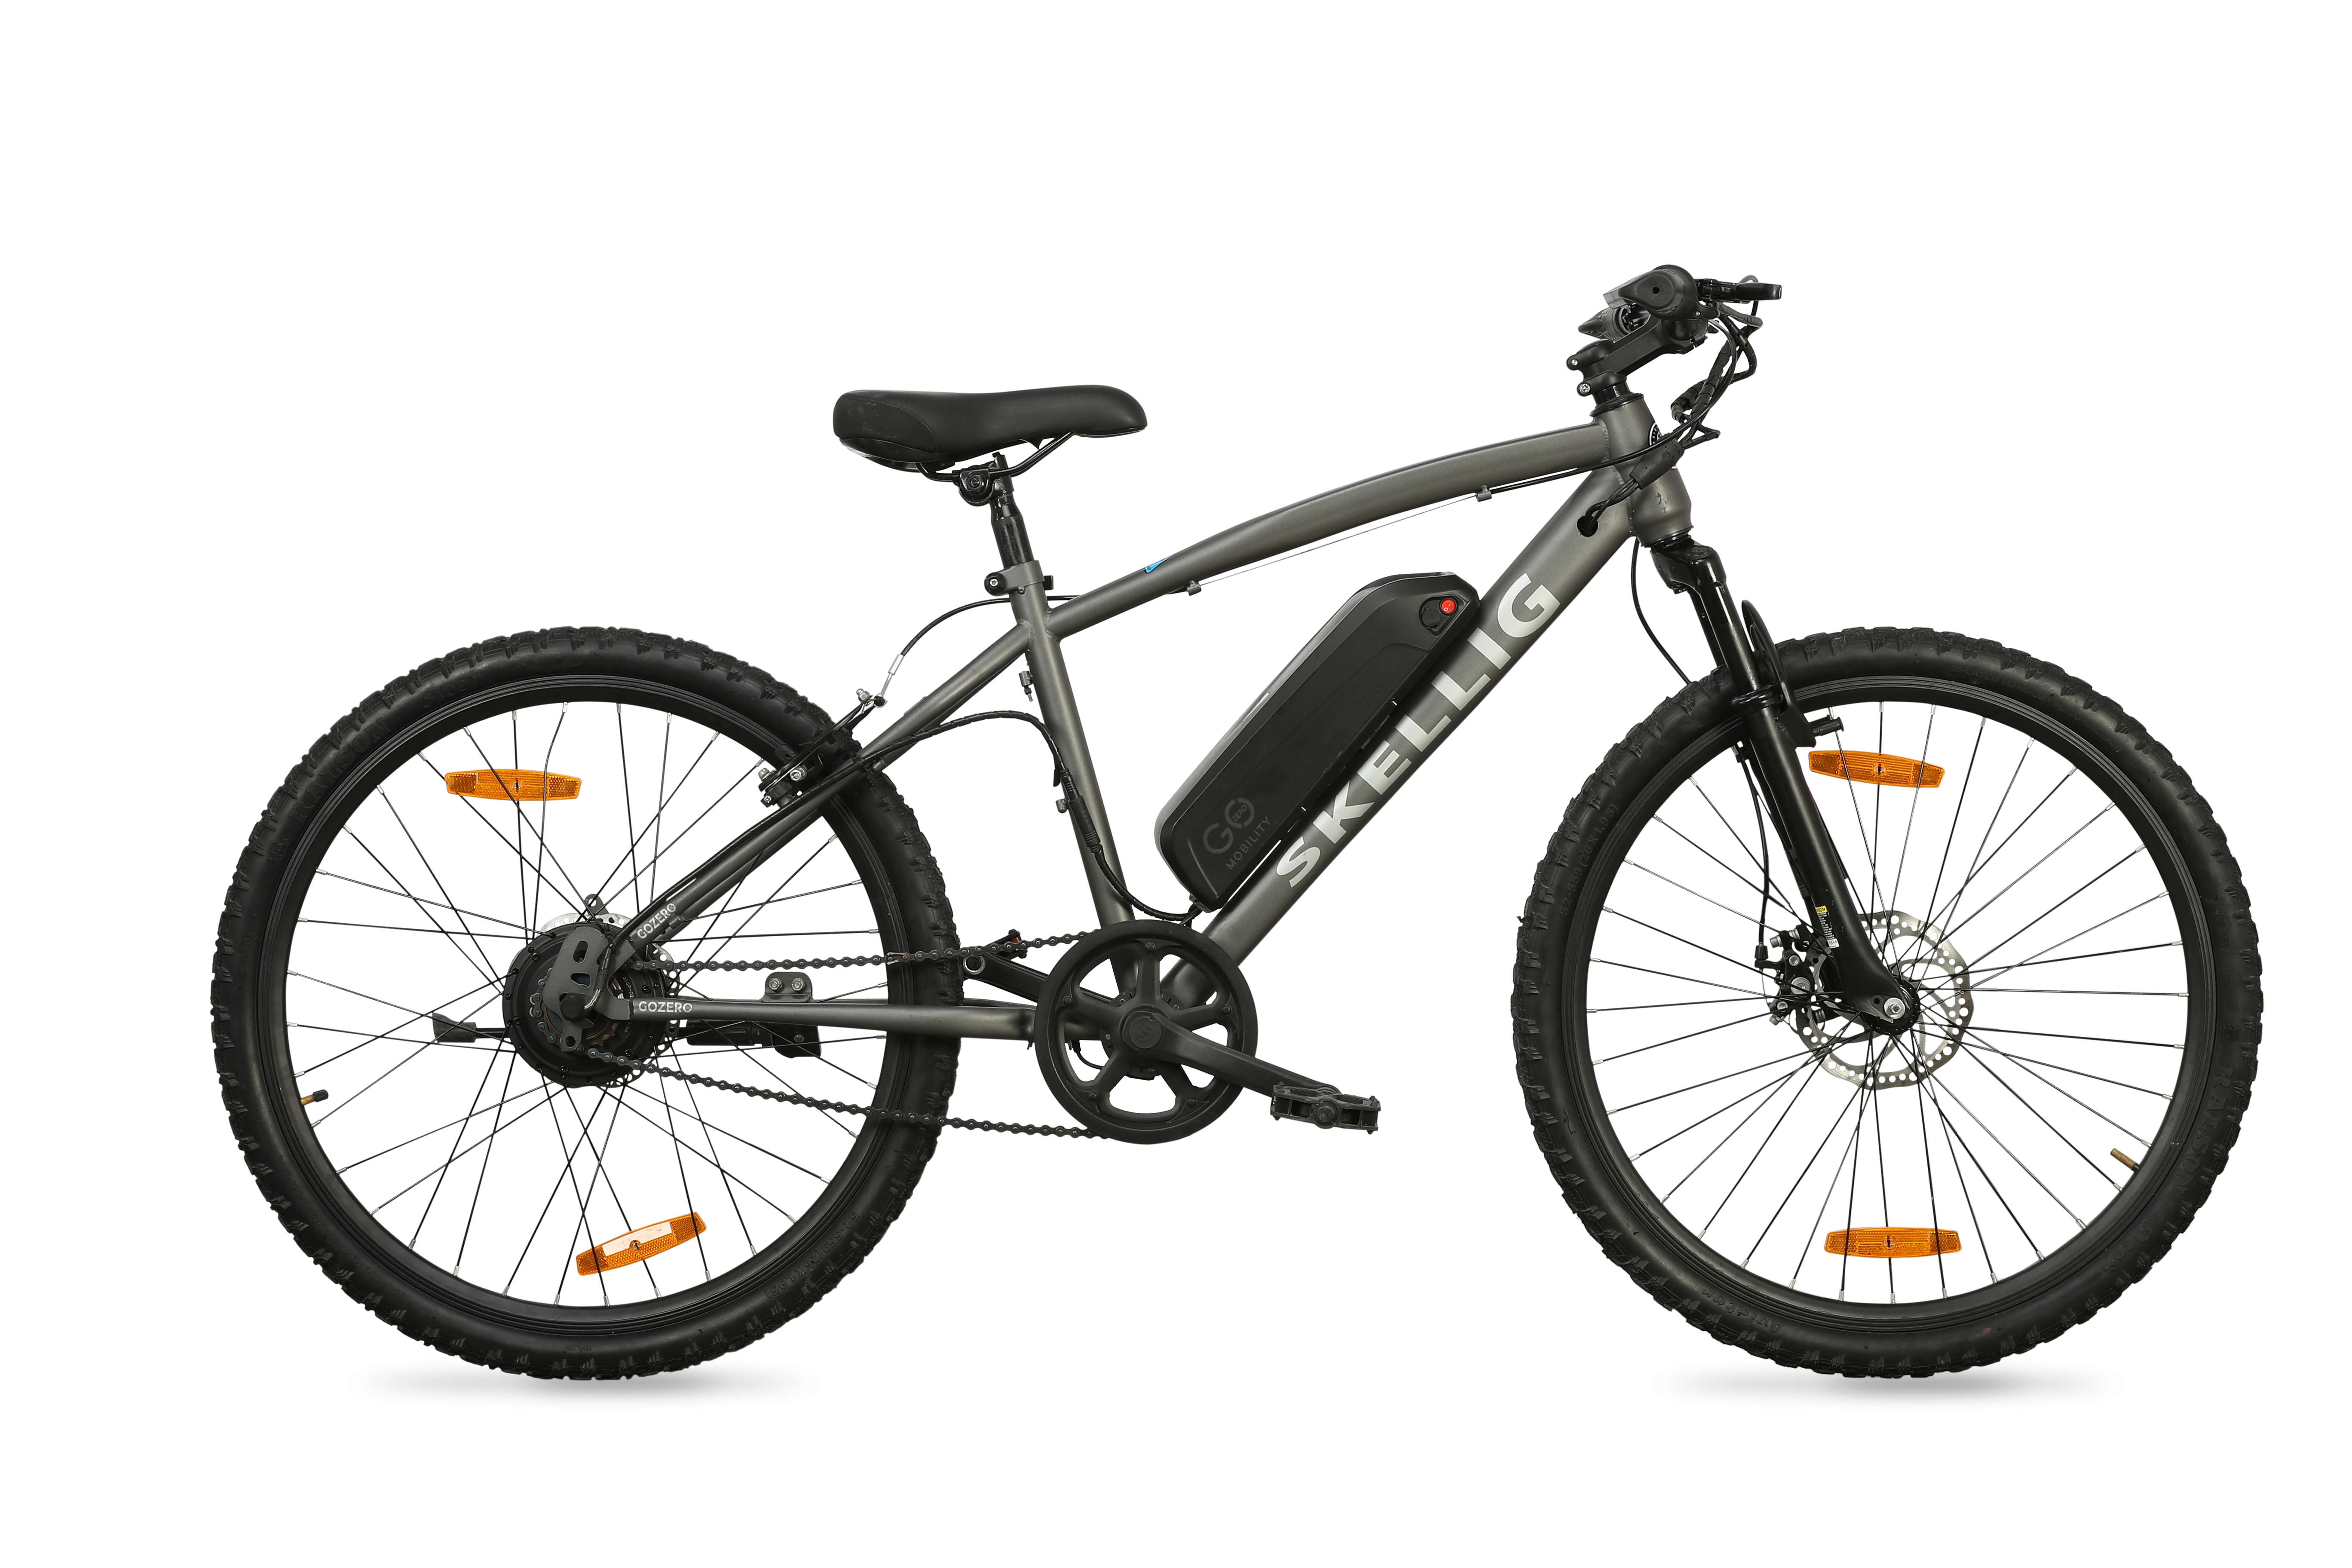 The battery takes about two and a half hours to recharge. The Lite includes an alloy stem handle, with 26x1.95 tyres, specialized V-brakes and a rigid front fork.